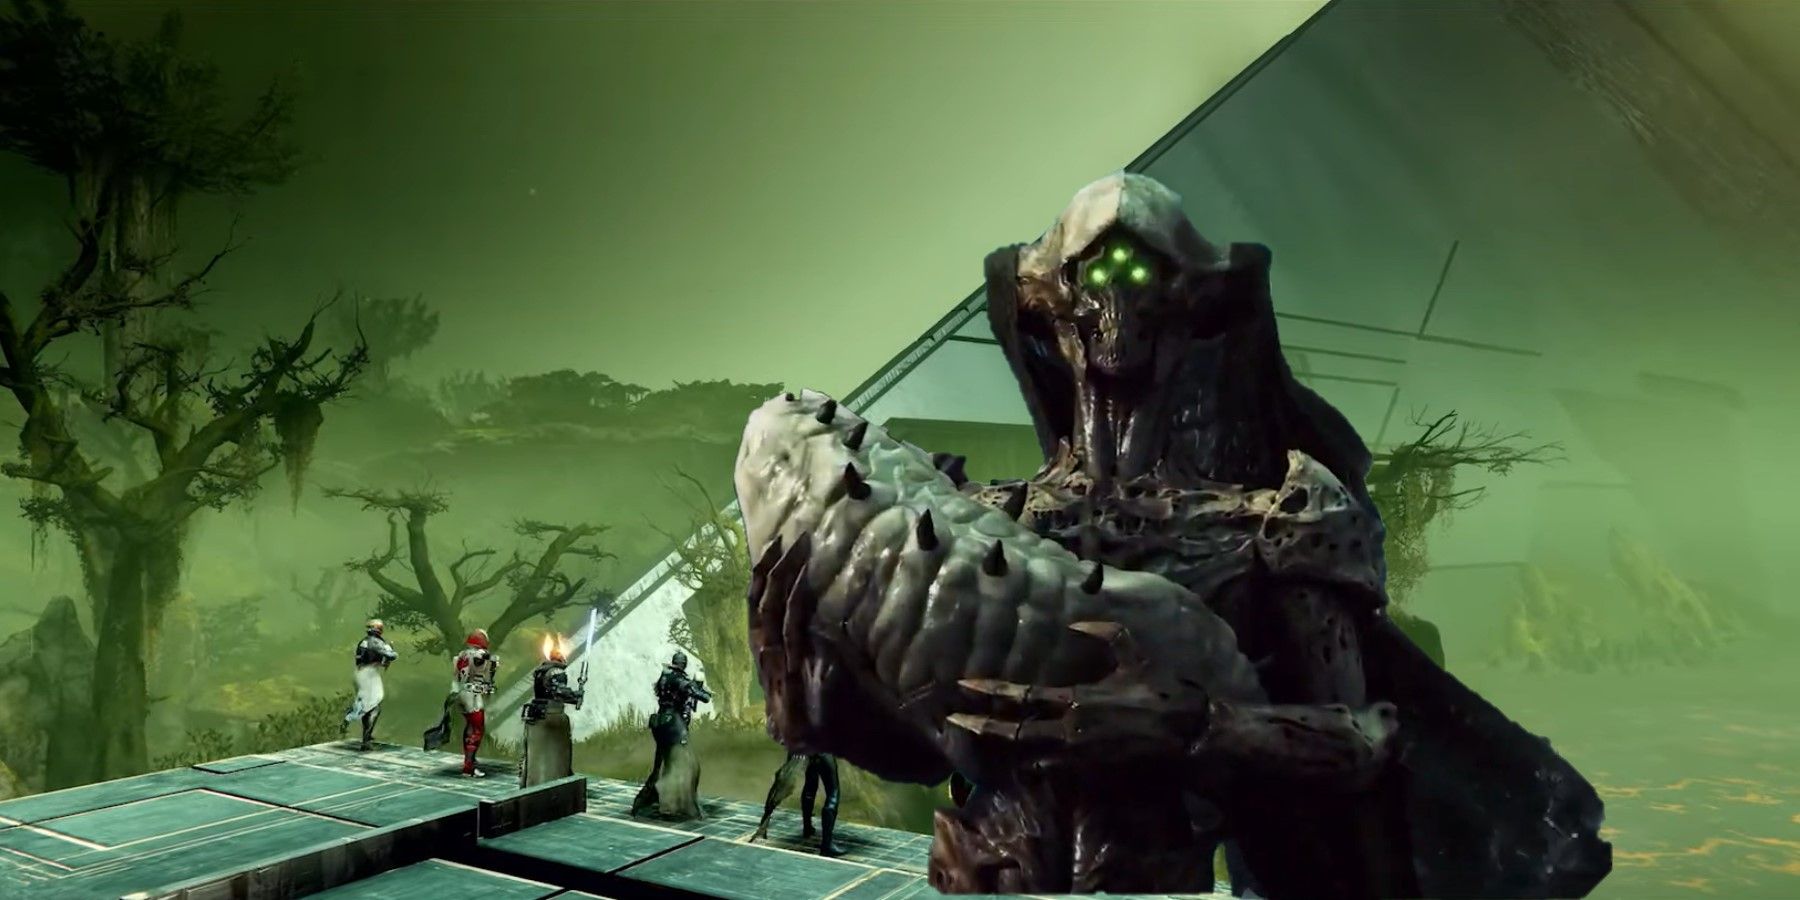 destiny 2 the witch queen expansion launch trailer details story development savathun hive worm god stolen light powers traveler the witch queen raid release pyramid ship swamp